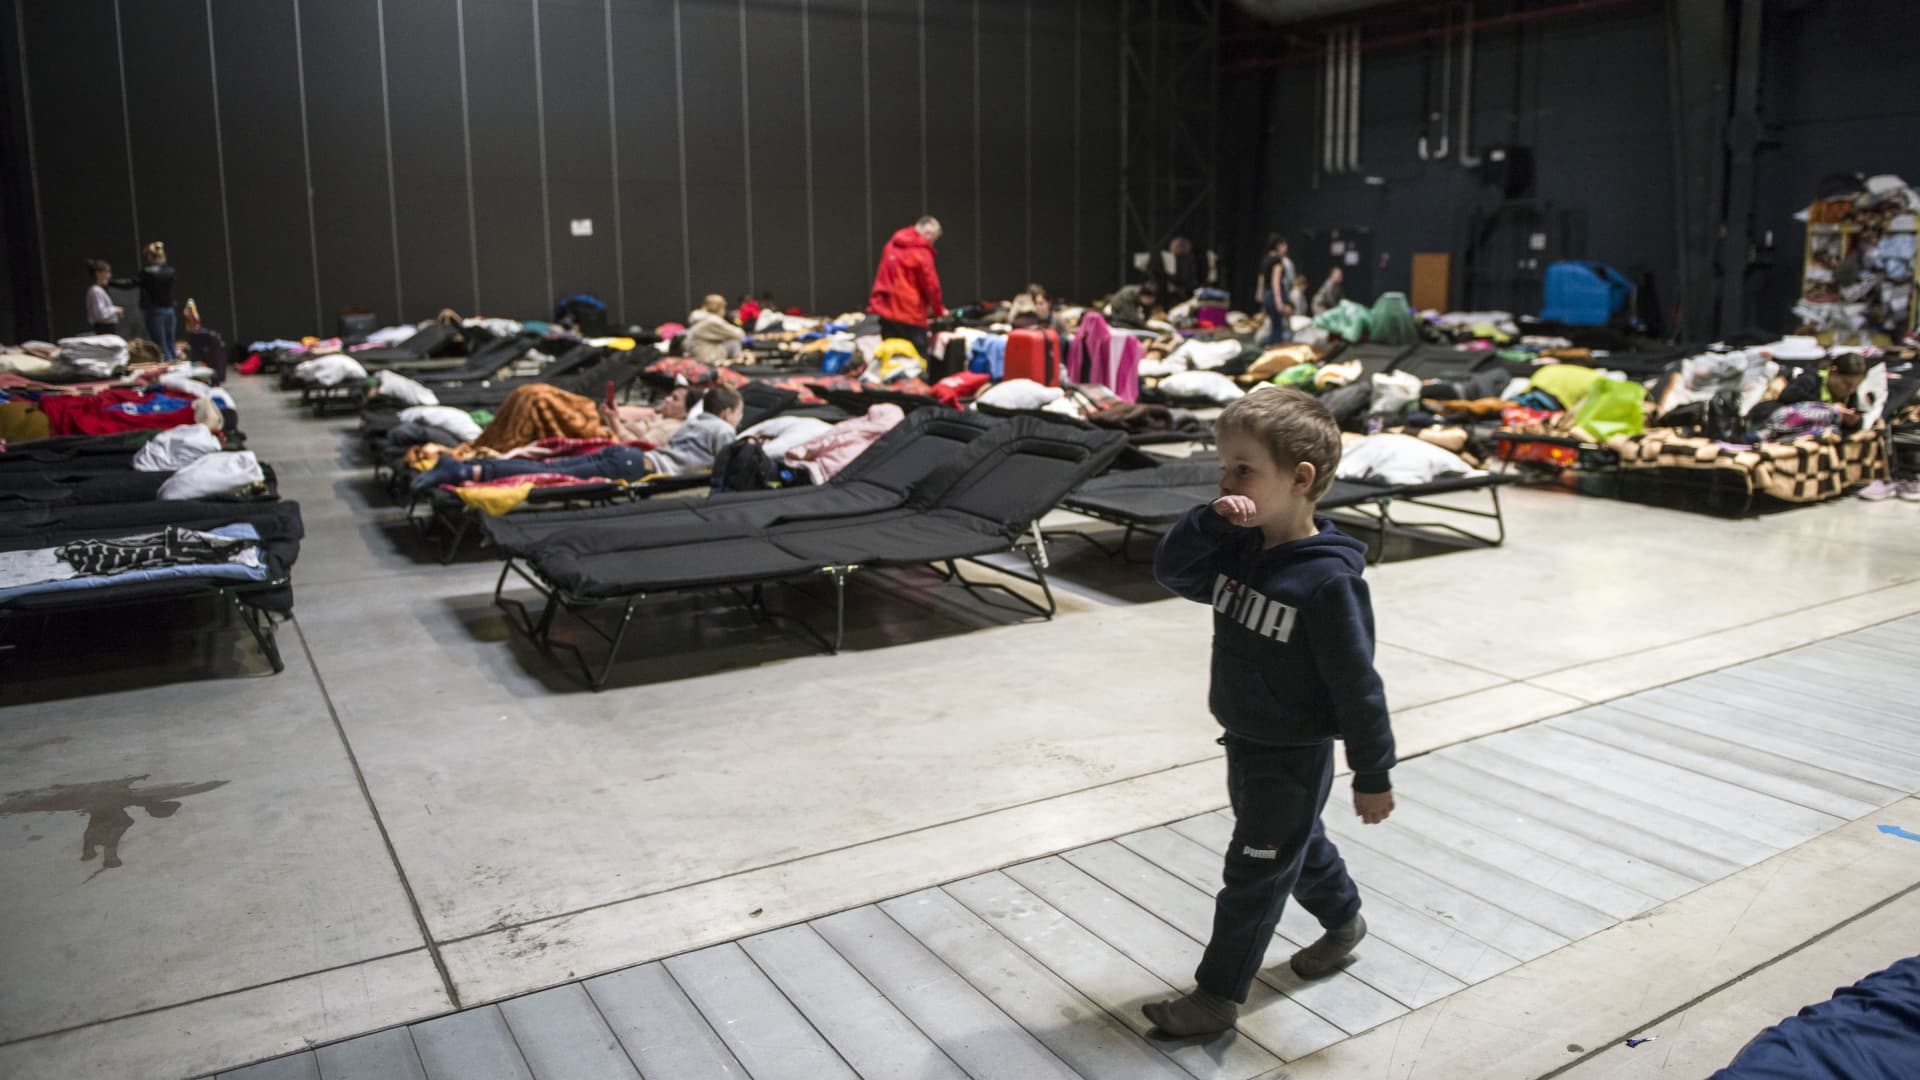 A Ukrainian boy walks past temporary beds at a refugee center in Warsaw on April 19.